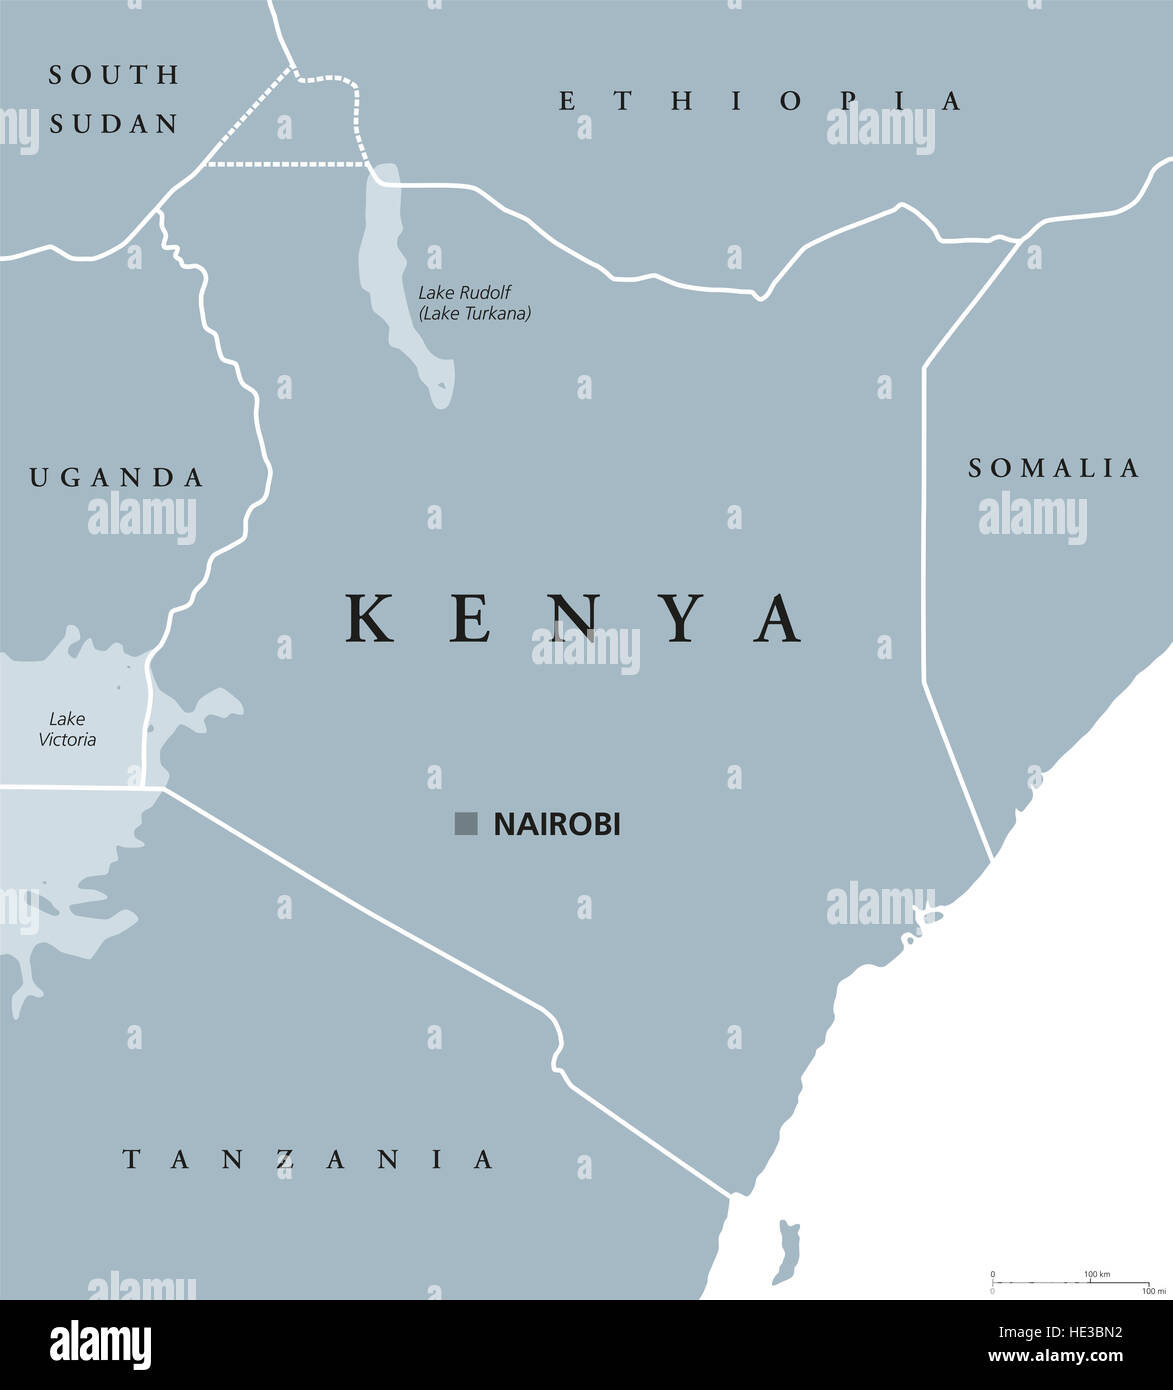 Kenya political map with capital Nairobi. Republic in Africa with national borders, neighbor countries. Stock Photo